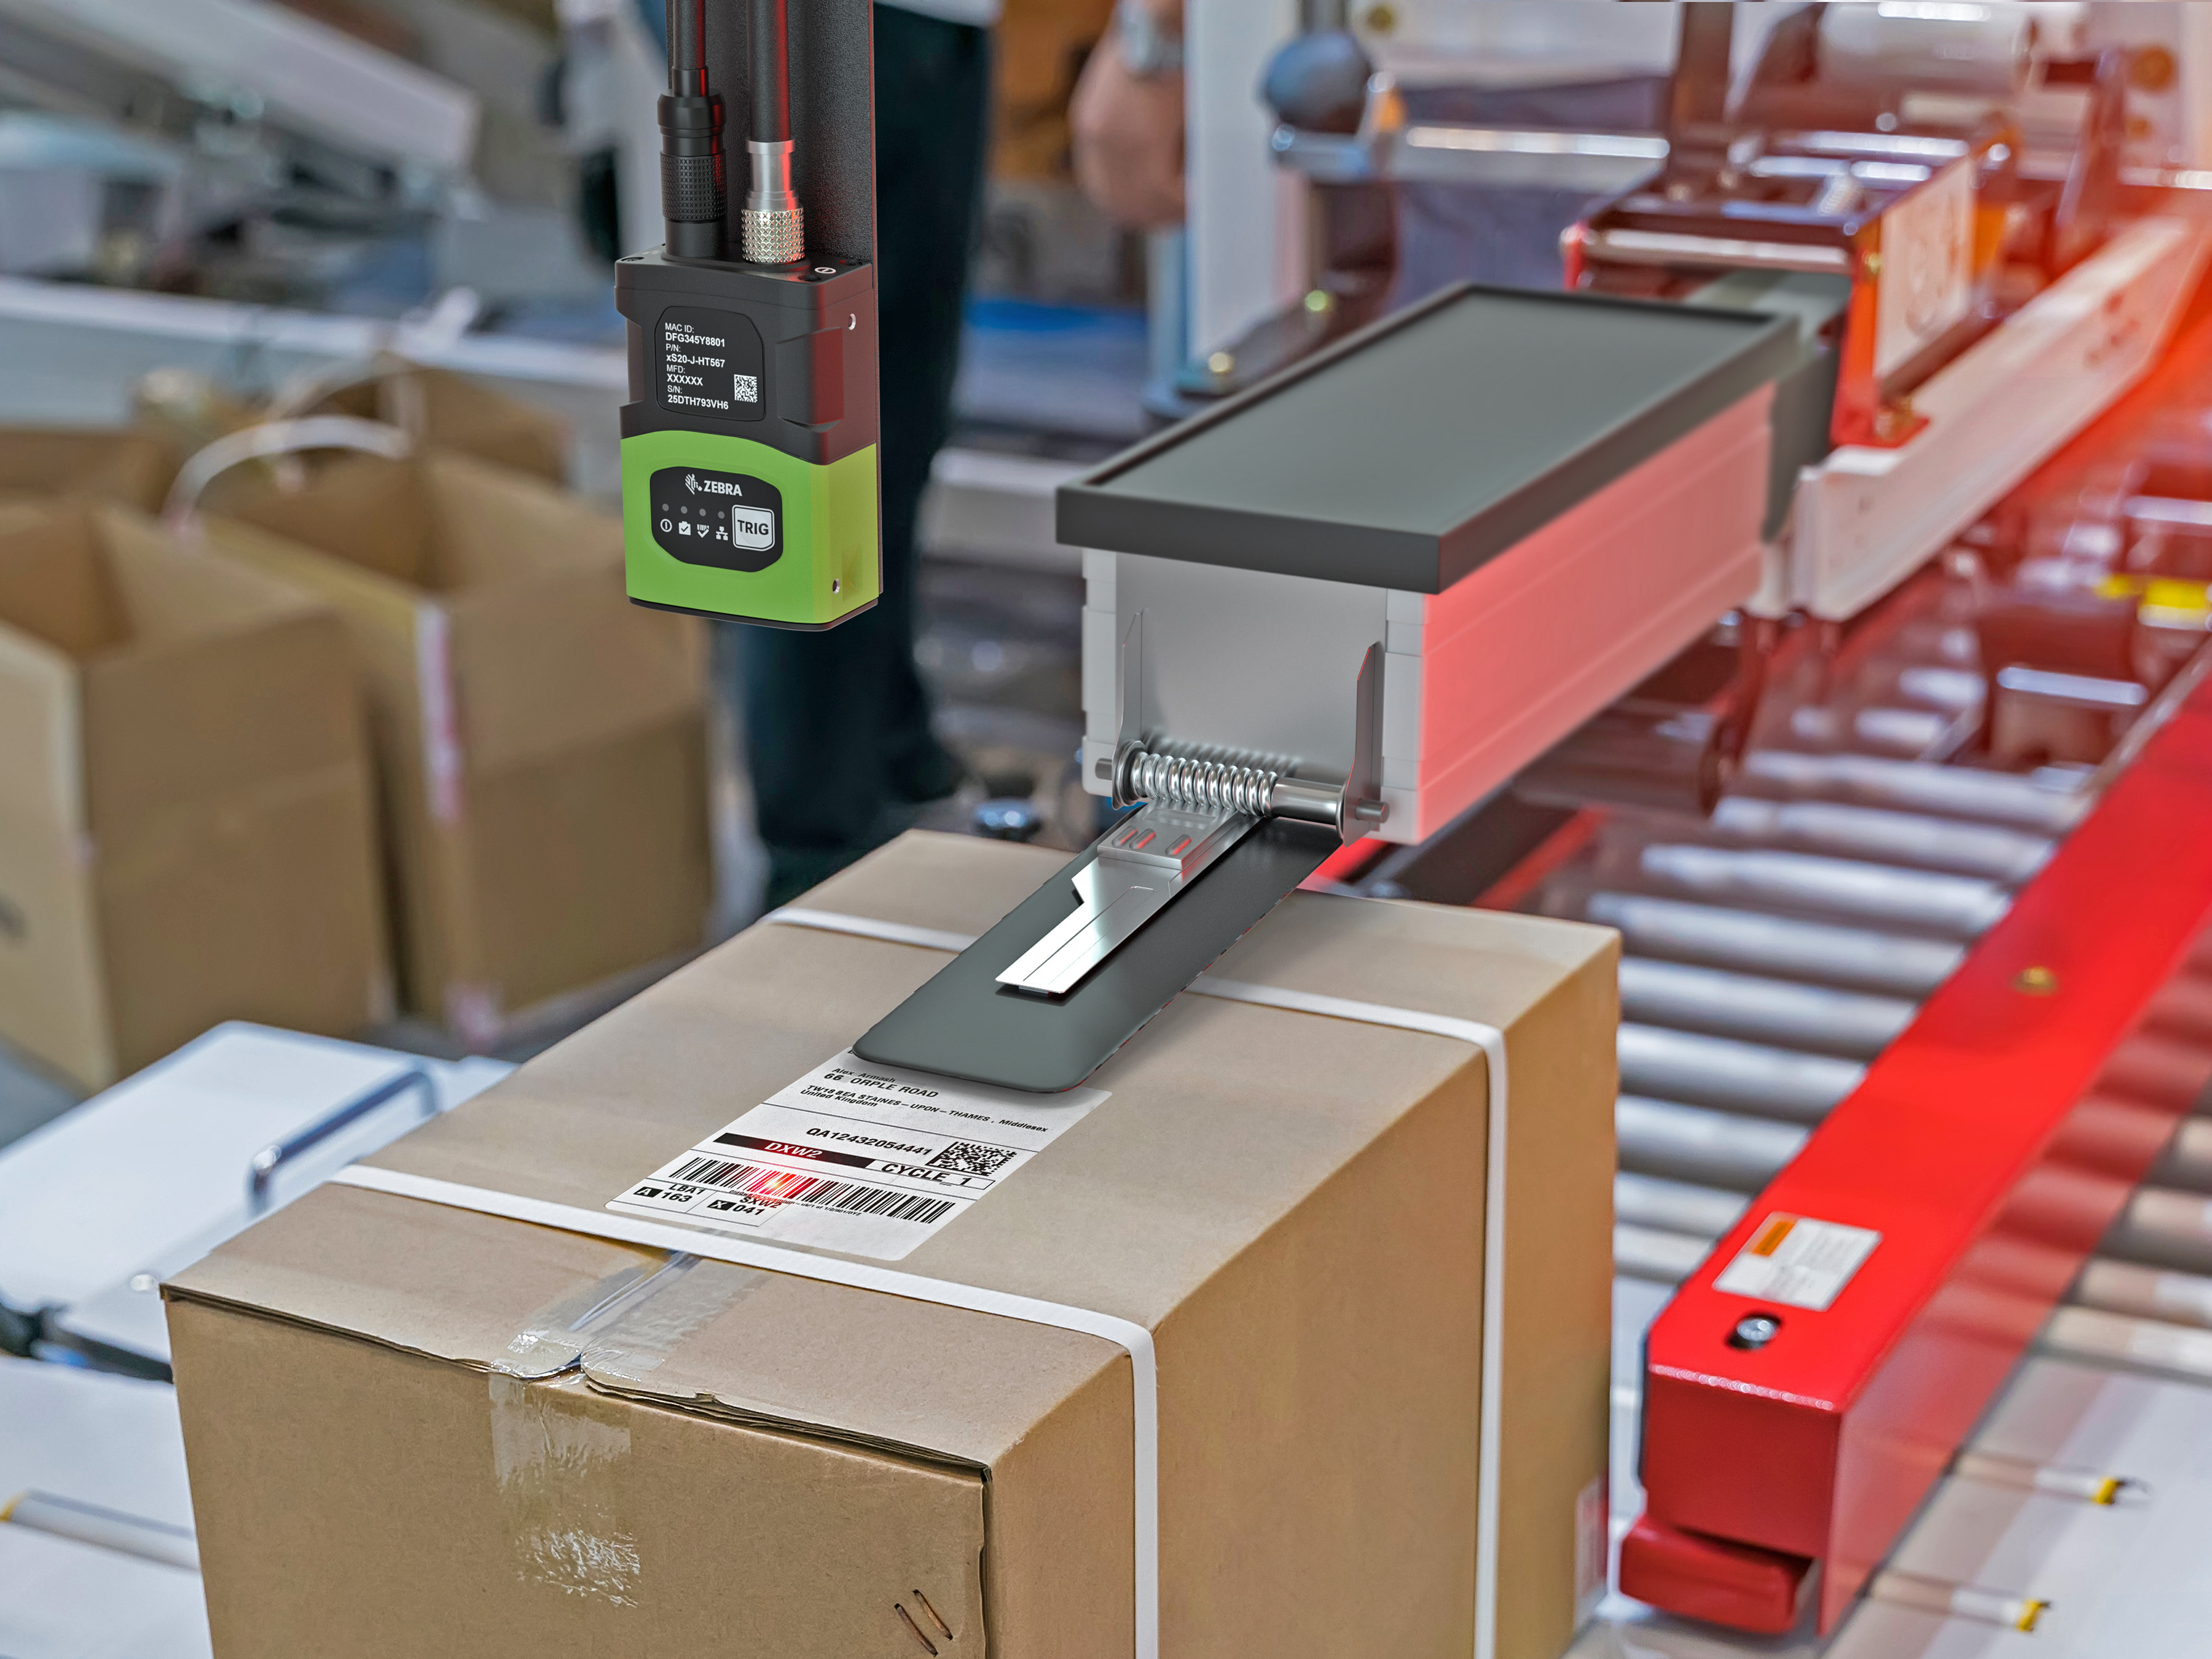 Zebra machine vision and fixed scanner scans barcode on a package shipping label